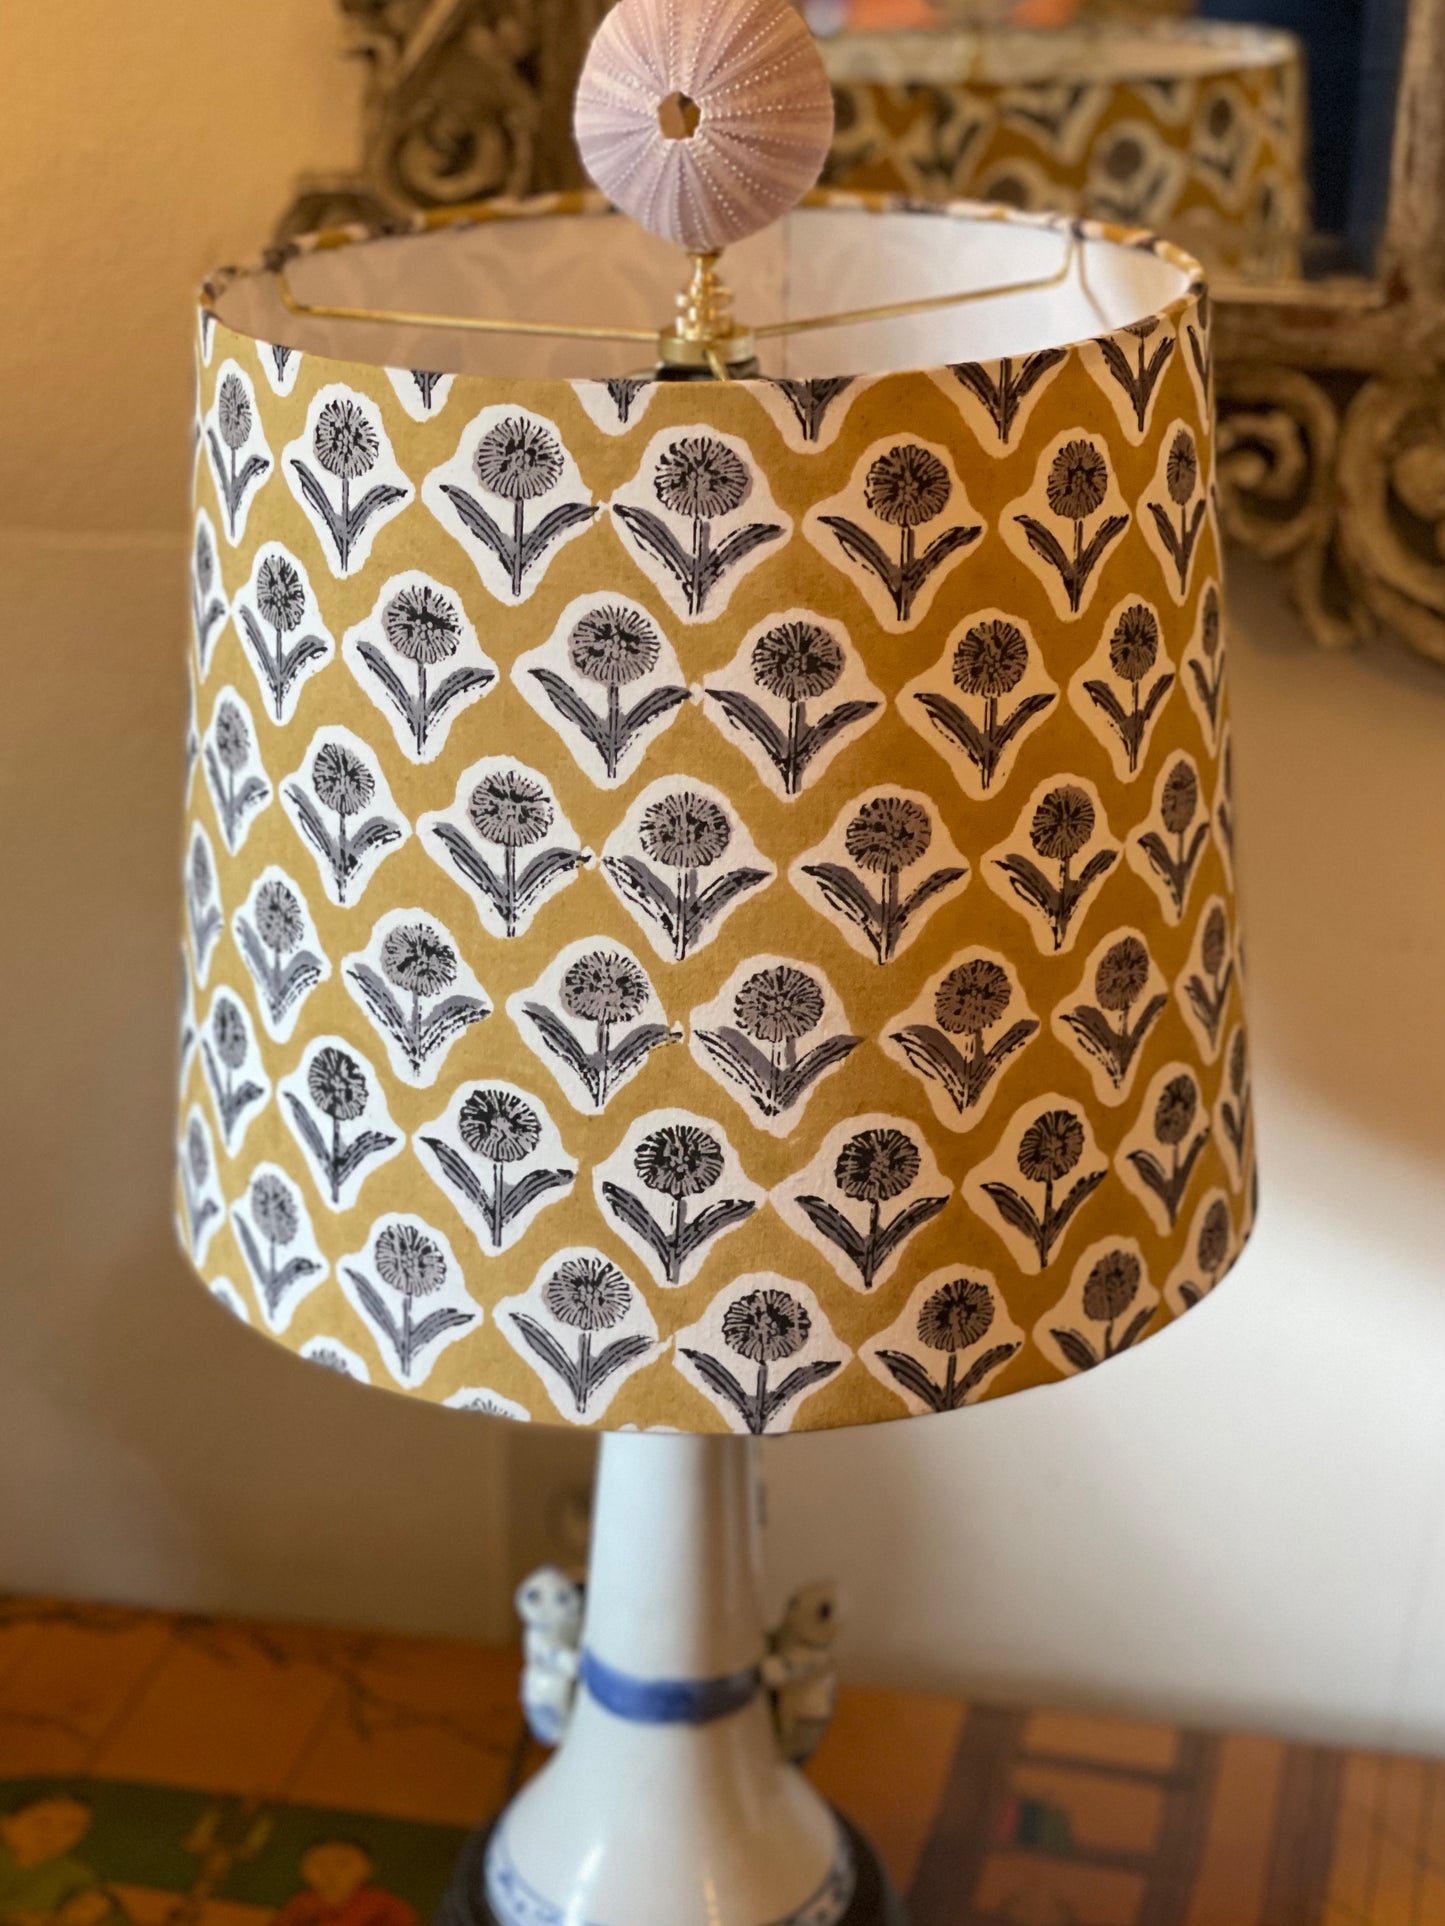 Medium Empire Lampshade. Indian Block print from Jaipur. Harvest Gold with Black and Gray Floral Motif.